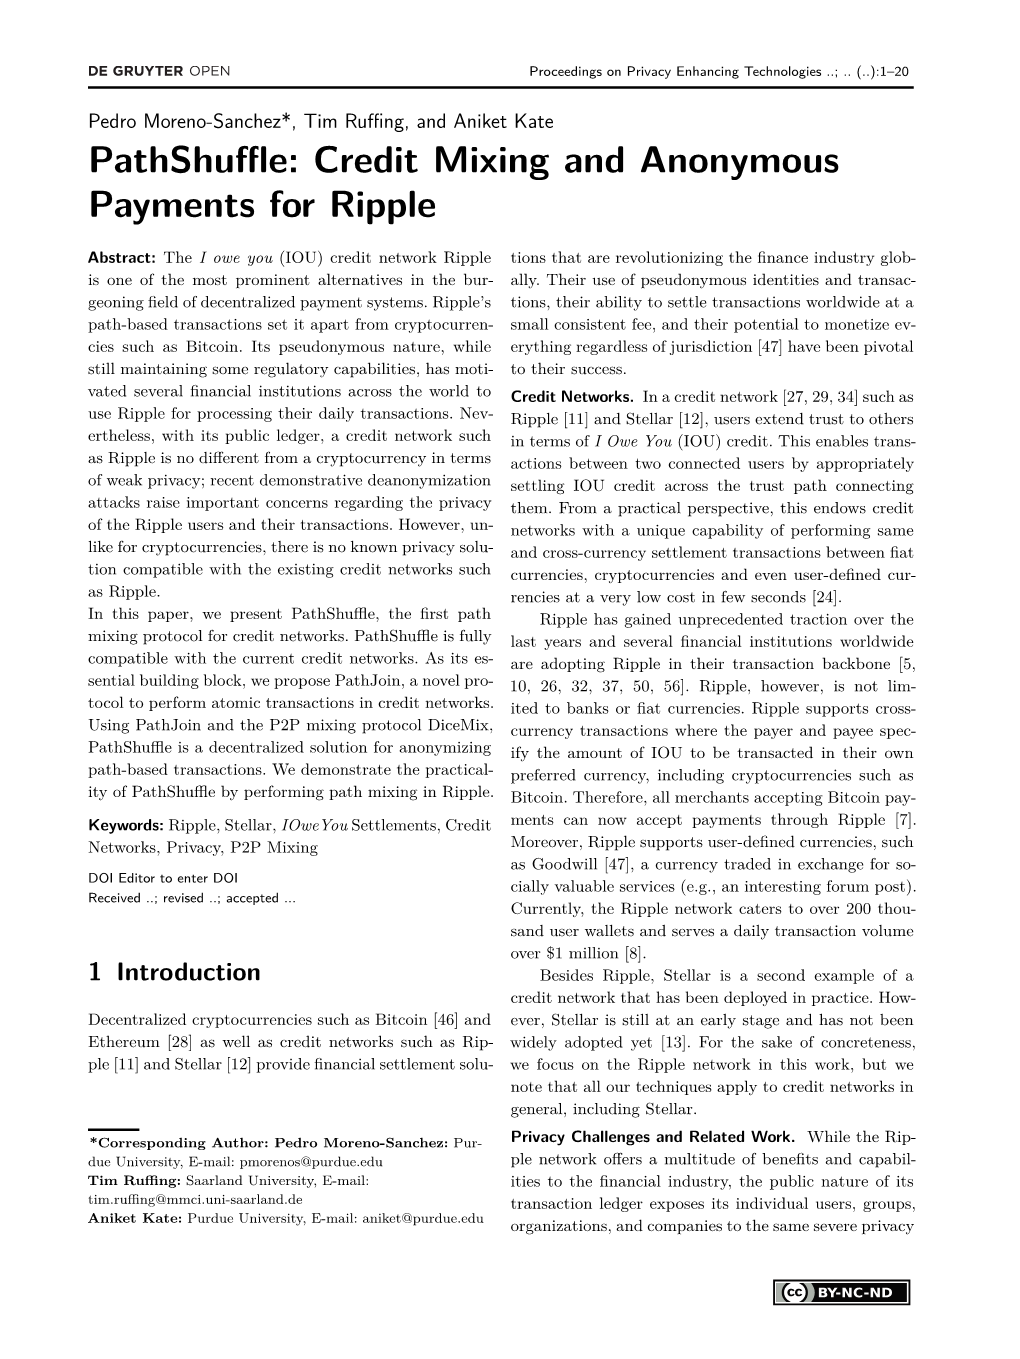 Pathshuffle: Credit Mixing and Anonymous Payments for Ripple